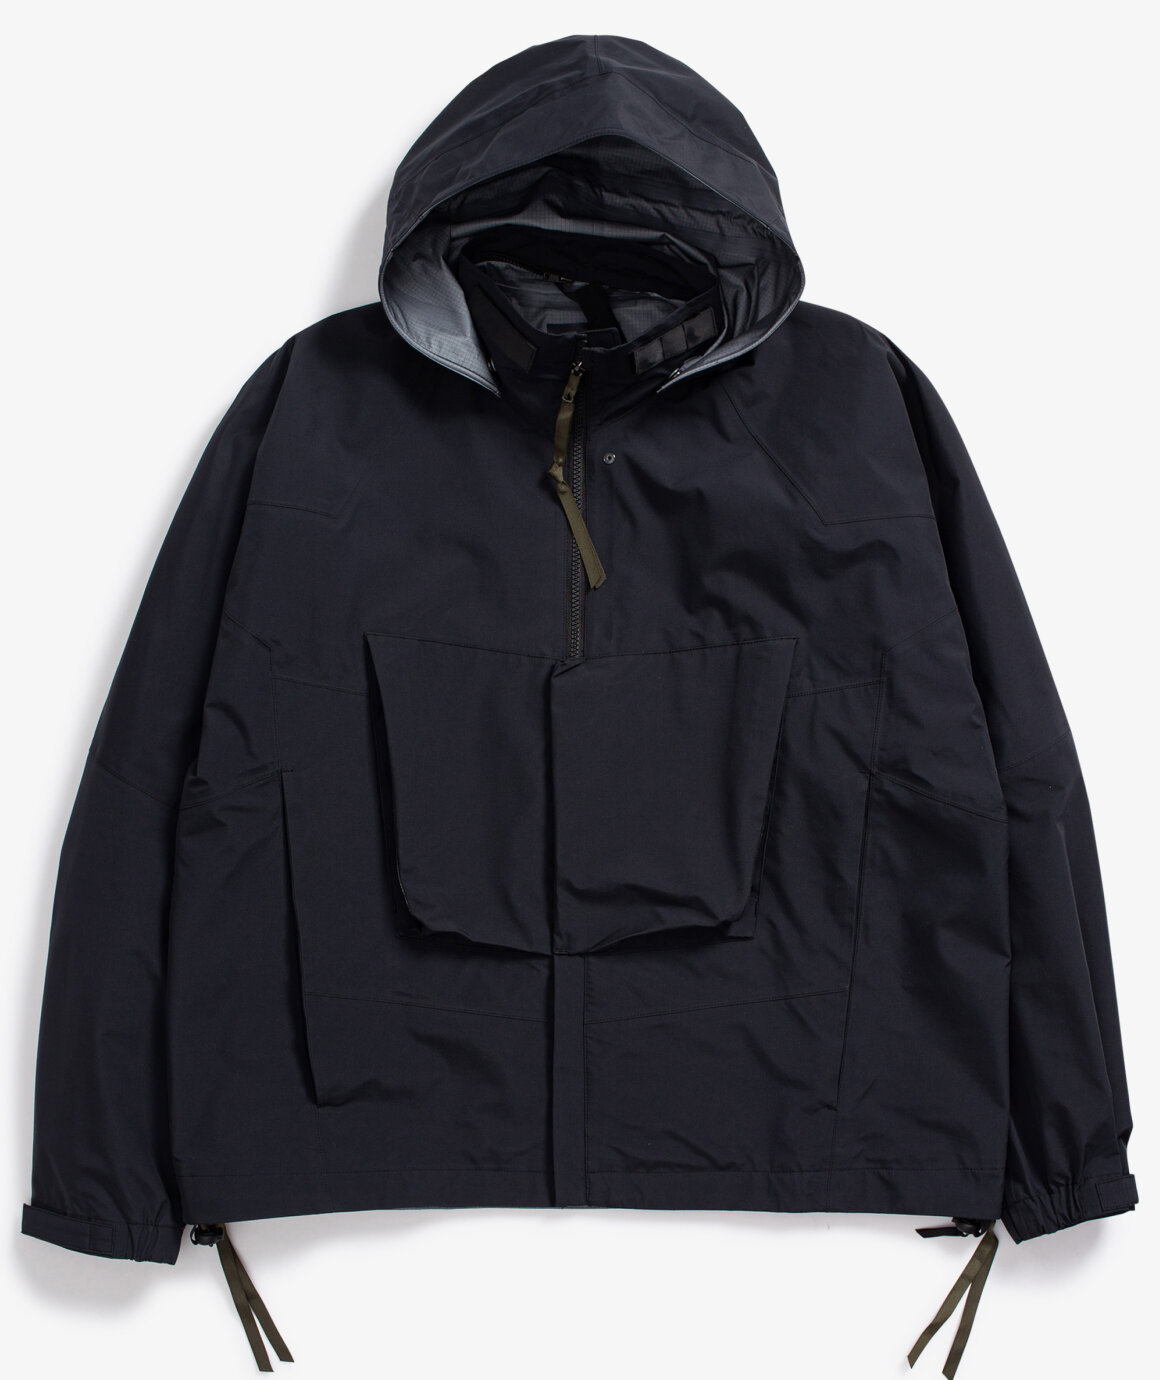 Norse Store | Shipping Worldwide - Acronym J96-GT - Black